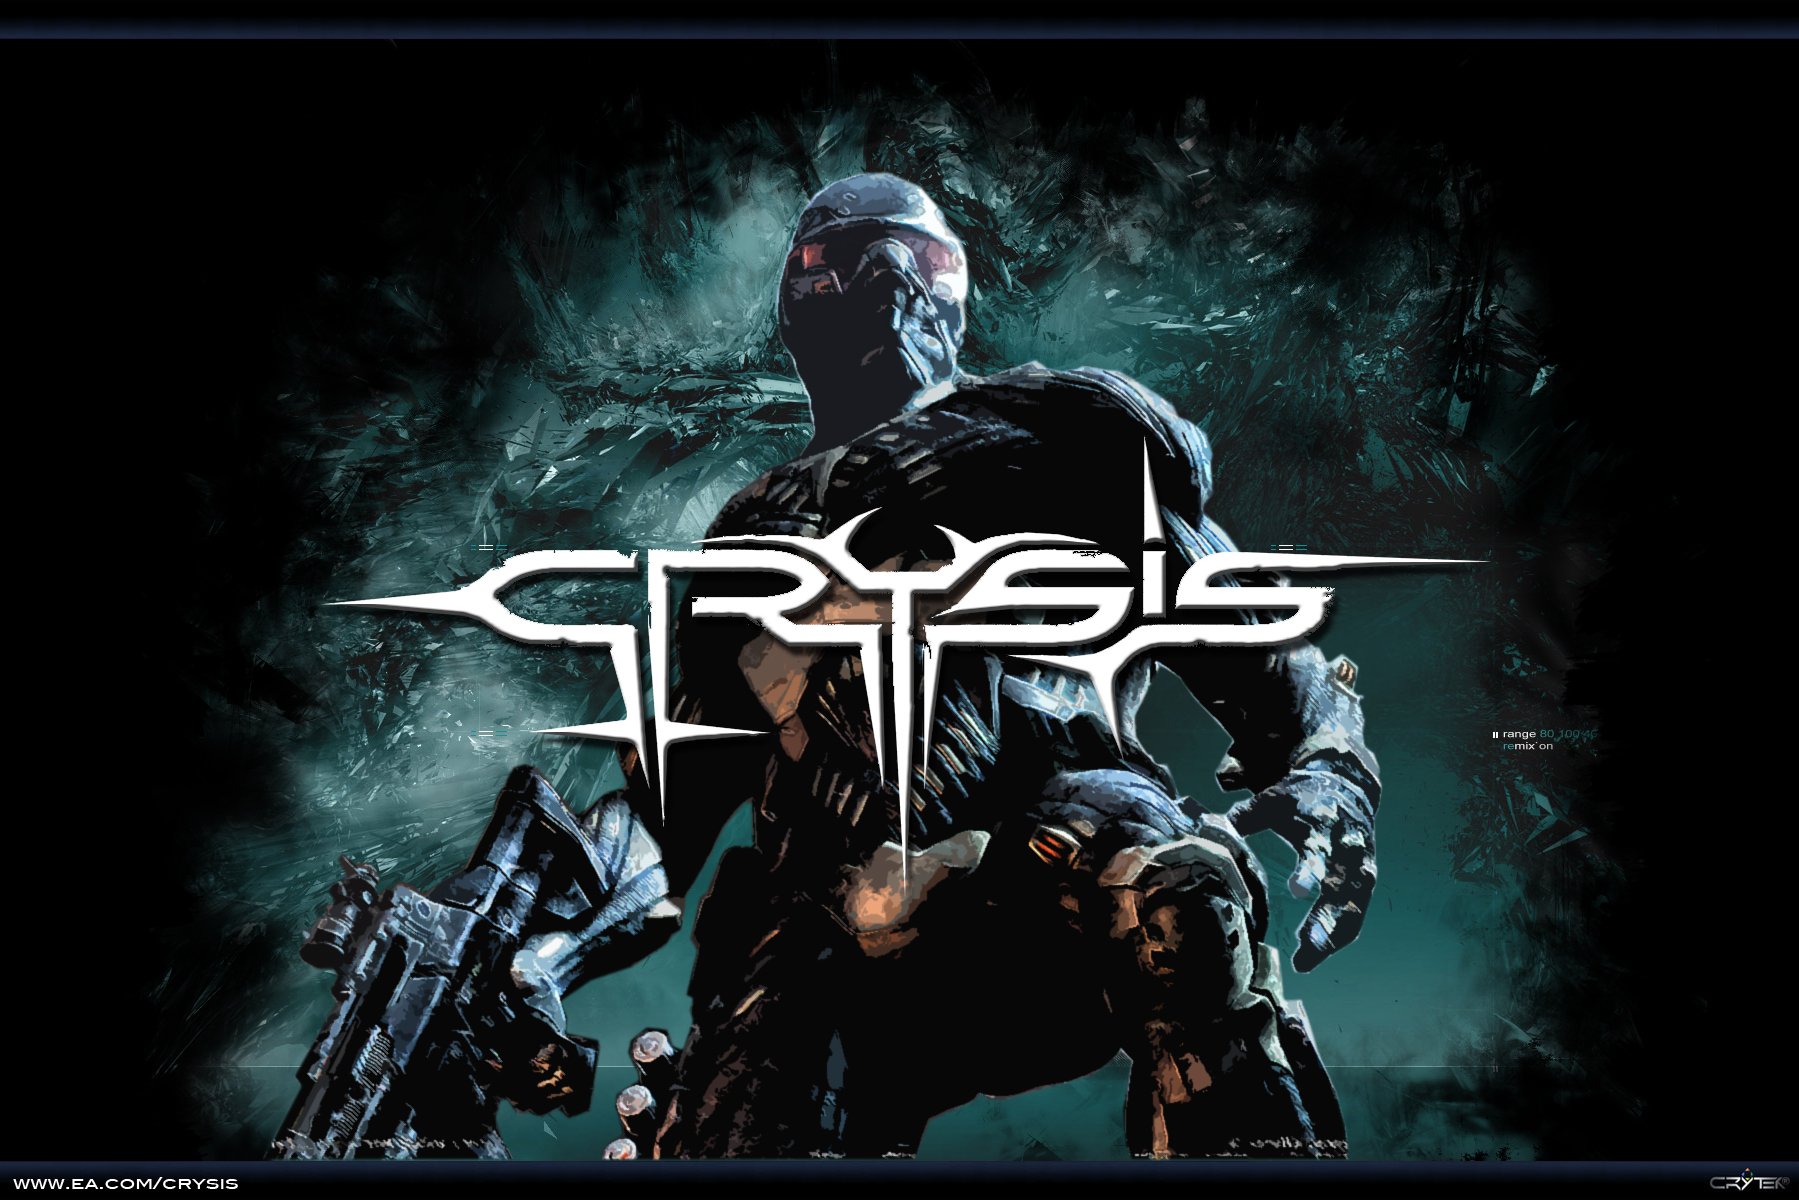 crysis, Sci fi, Fps, Shooter, Action, Fighing, Futuristic, Warrior, Military, Apocalyptic, Poster Wallpaper